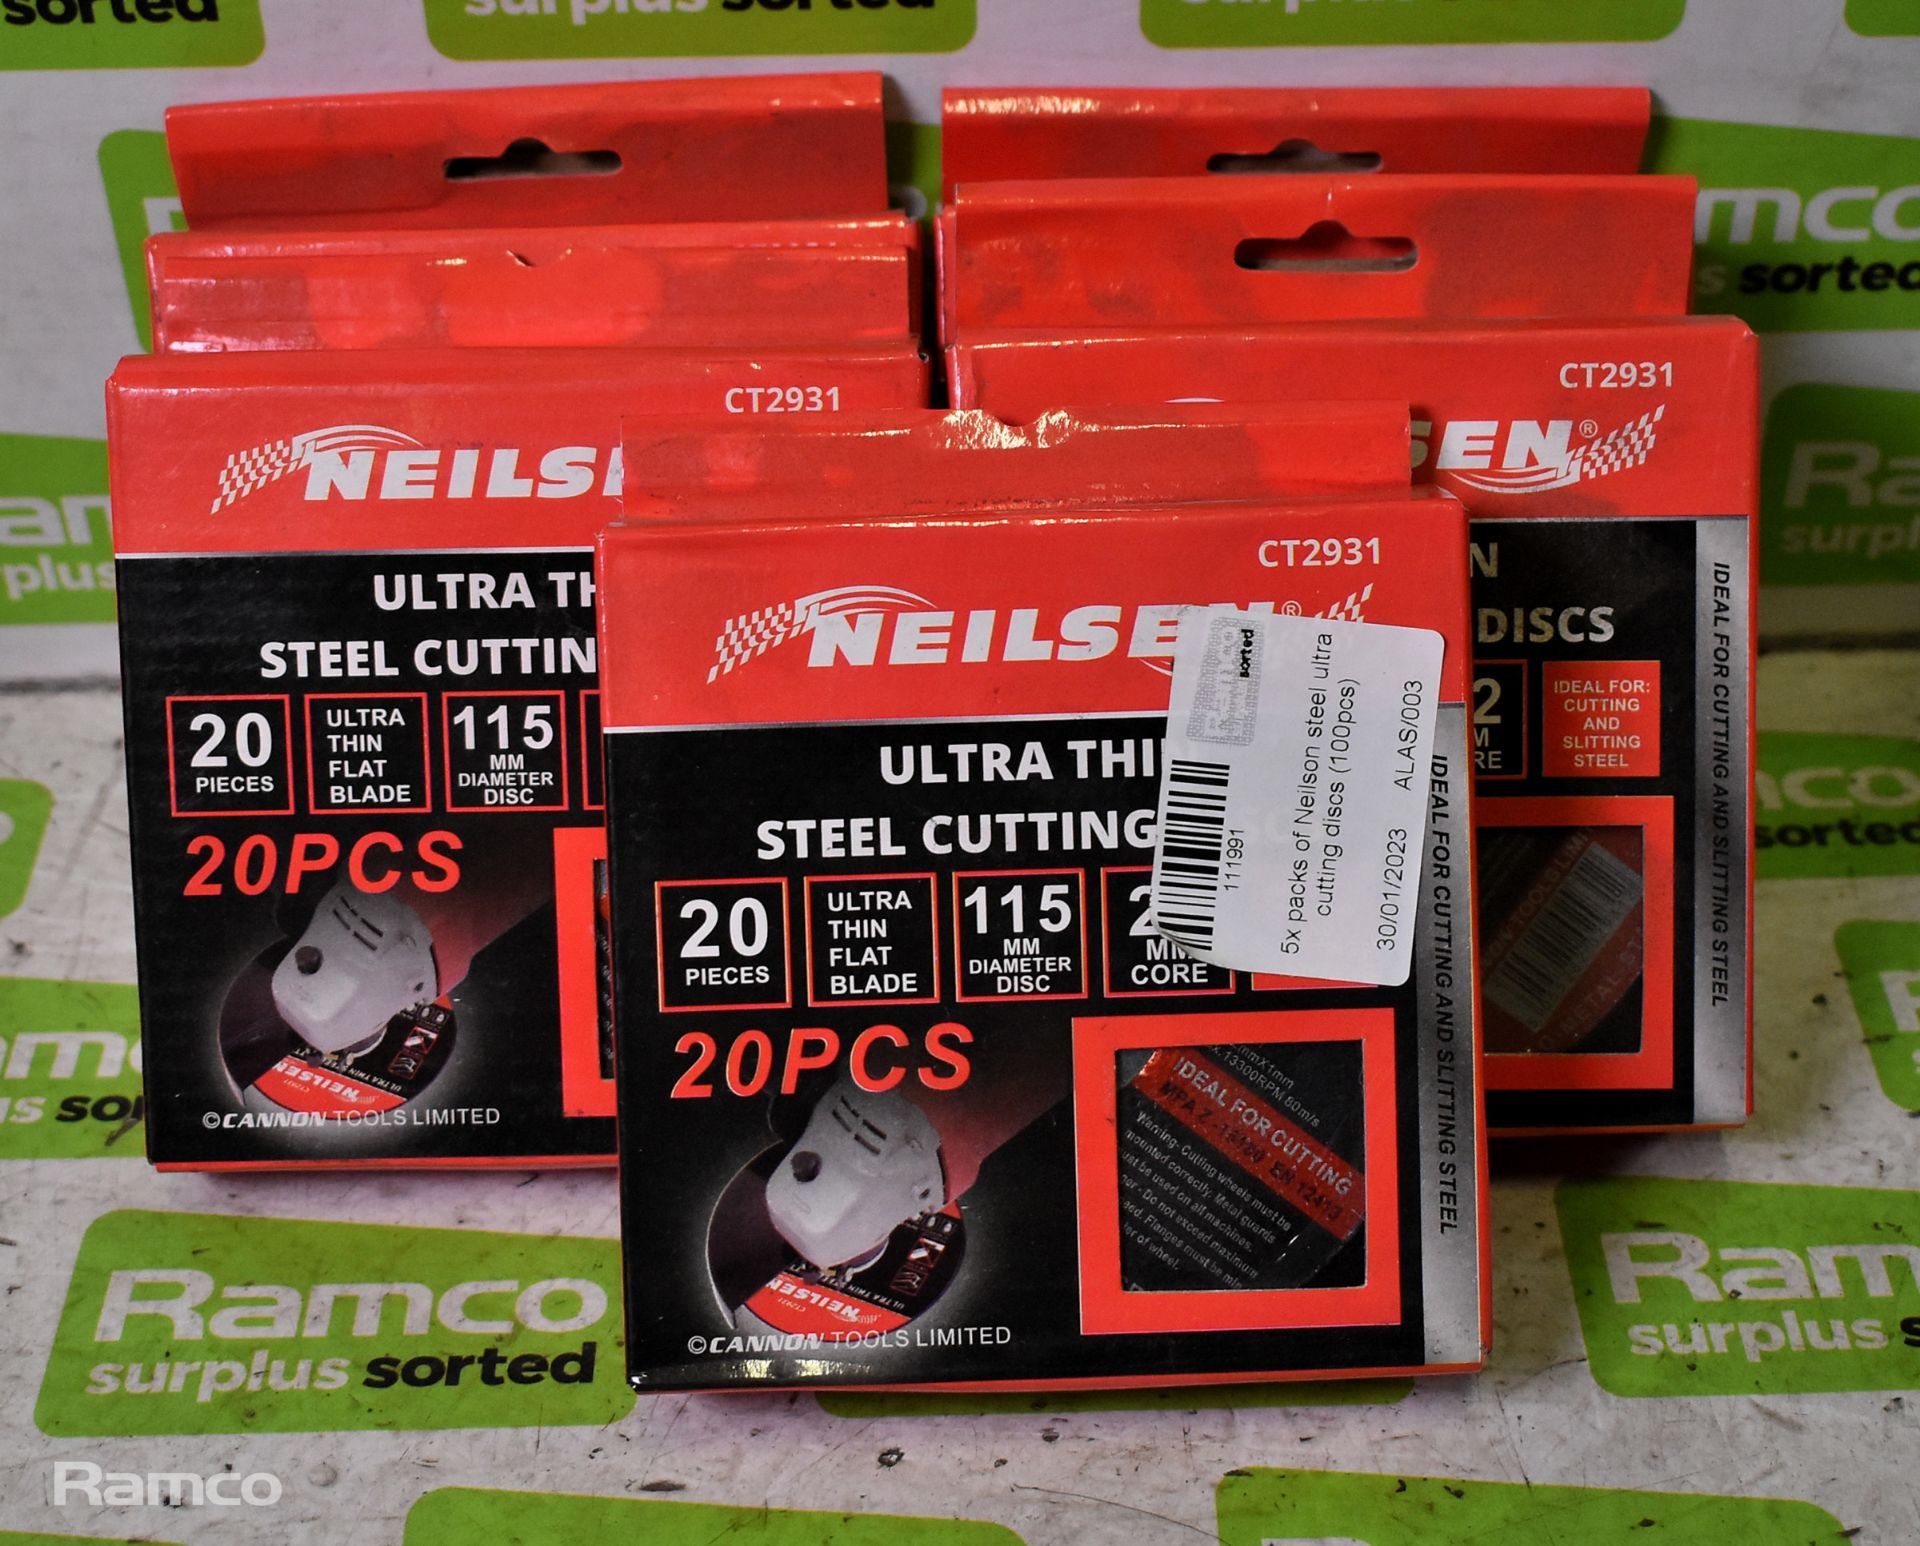 6x Dekton 80mm M14 twist knot wire cup brushes, 5x packs of Neilson steel ultra cutting discs - Image 10 of 12